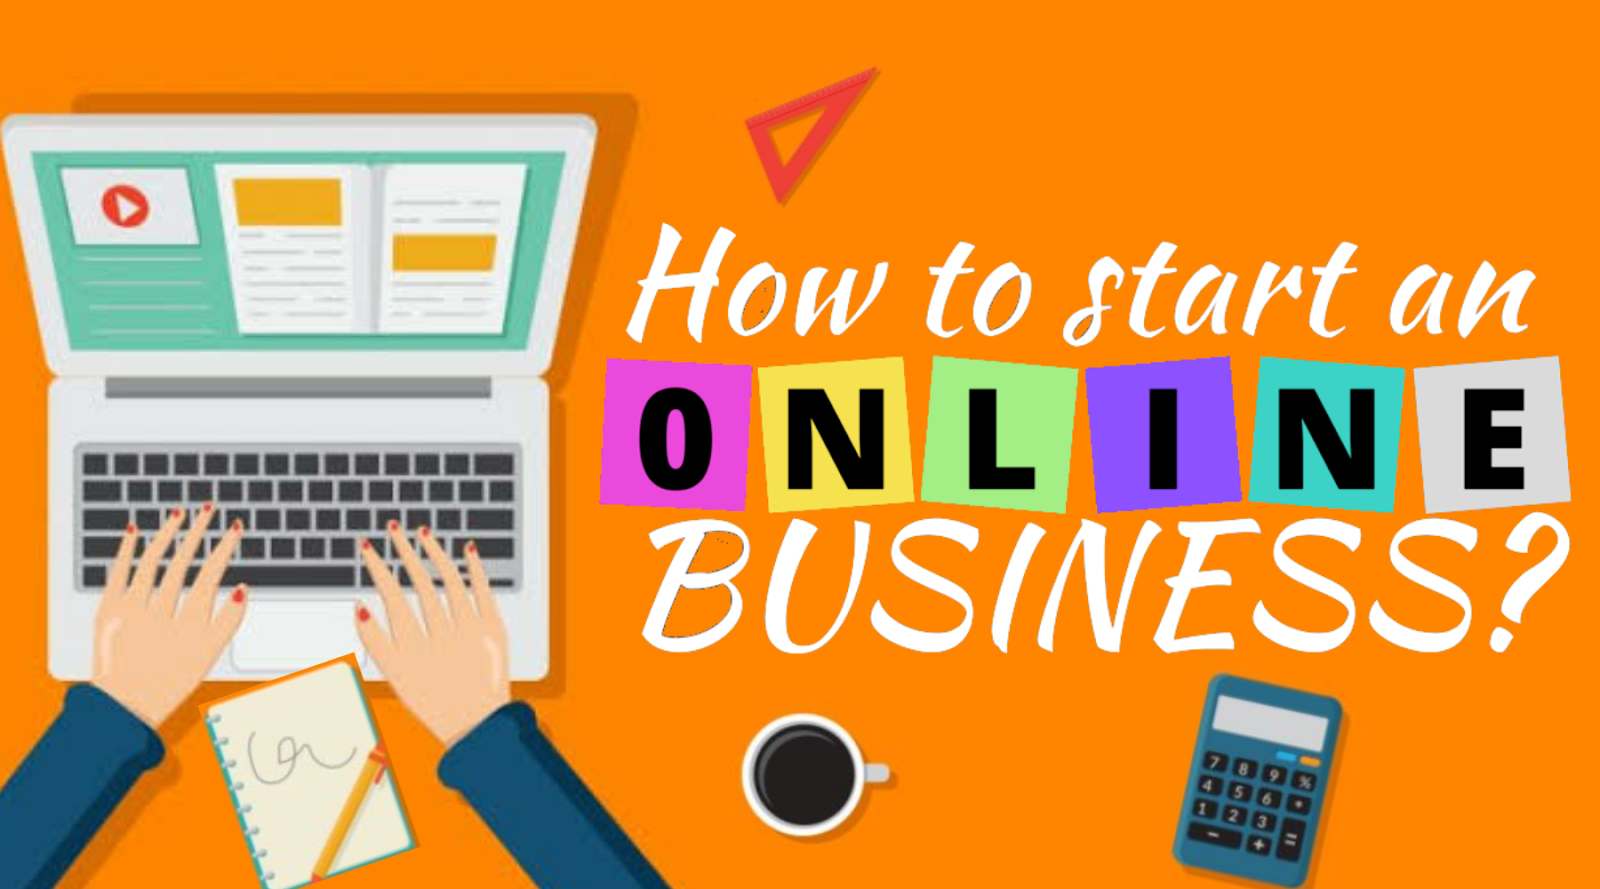 Role of online business